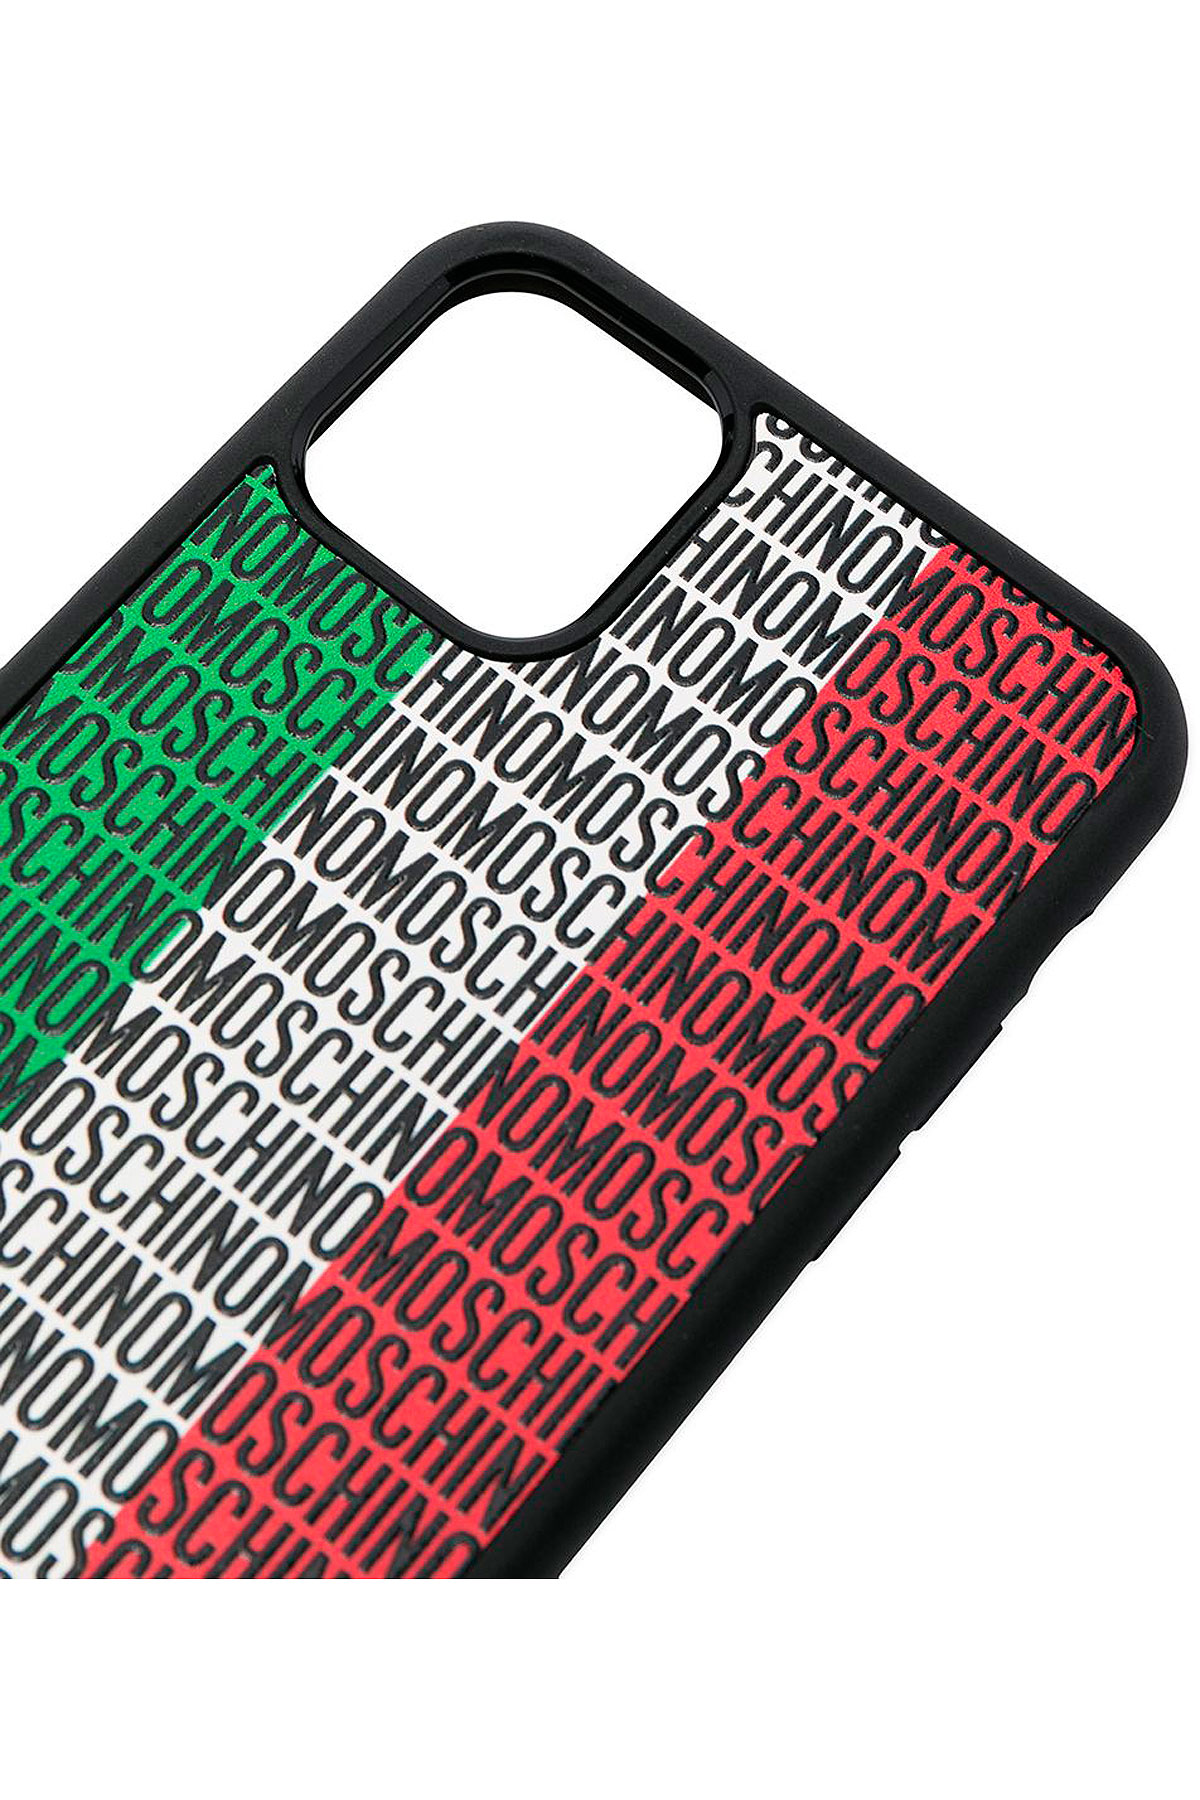 Iphone Cases Moschino Style Code 955 01 38